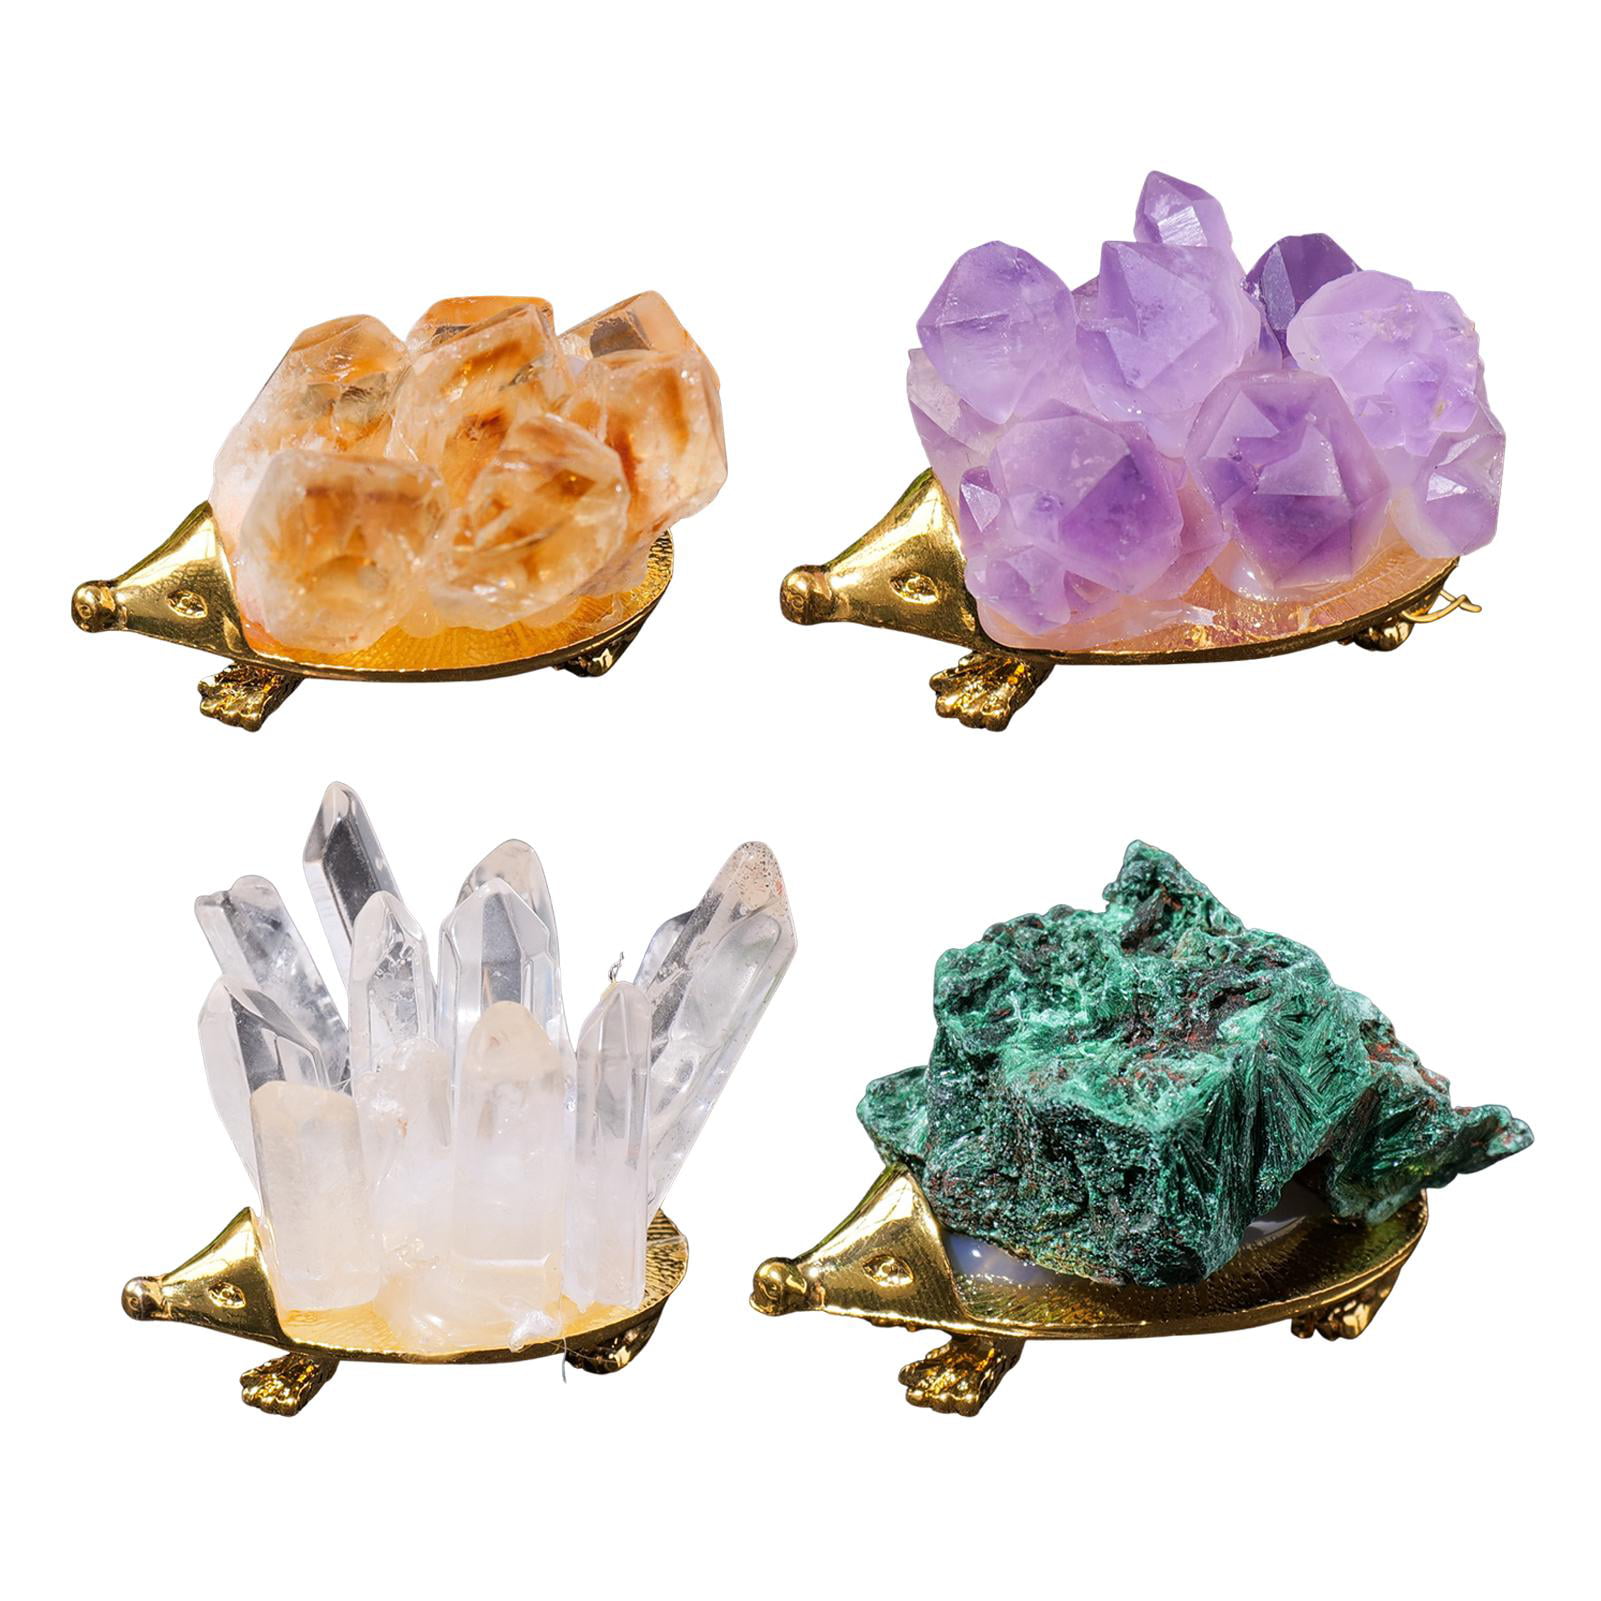 MEGAWHEELS Crystal Animal Figurines|Mini Glass Hedgehog Statues|Hand-Carved  Gemstone Healing Crystal Collection,Home Table Decoration Ornaments  Collectible Gifts 